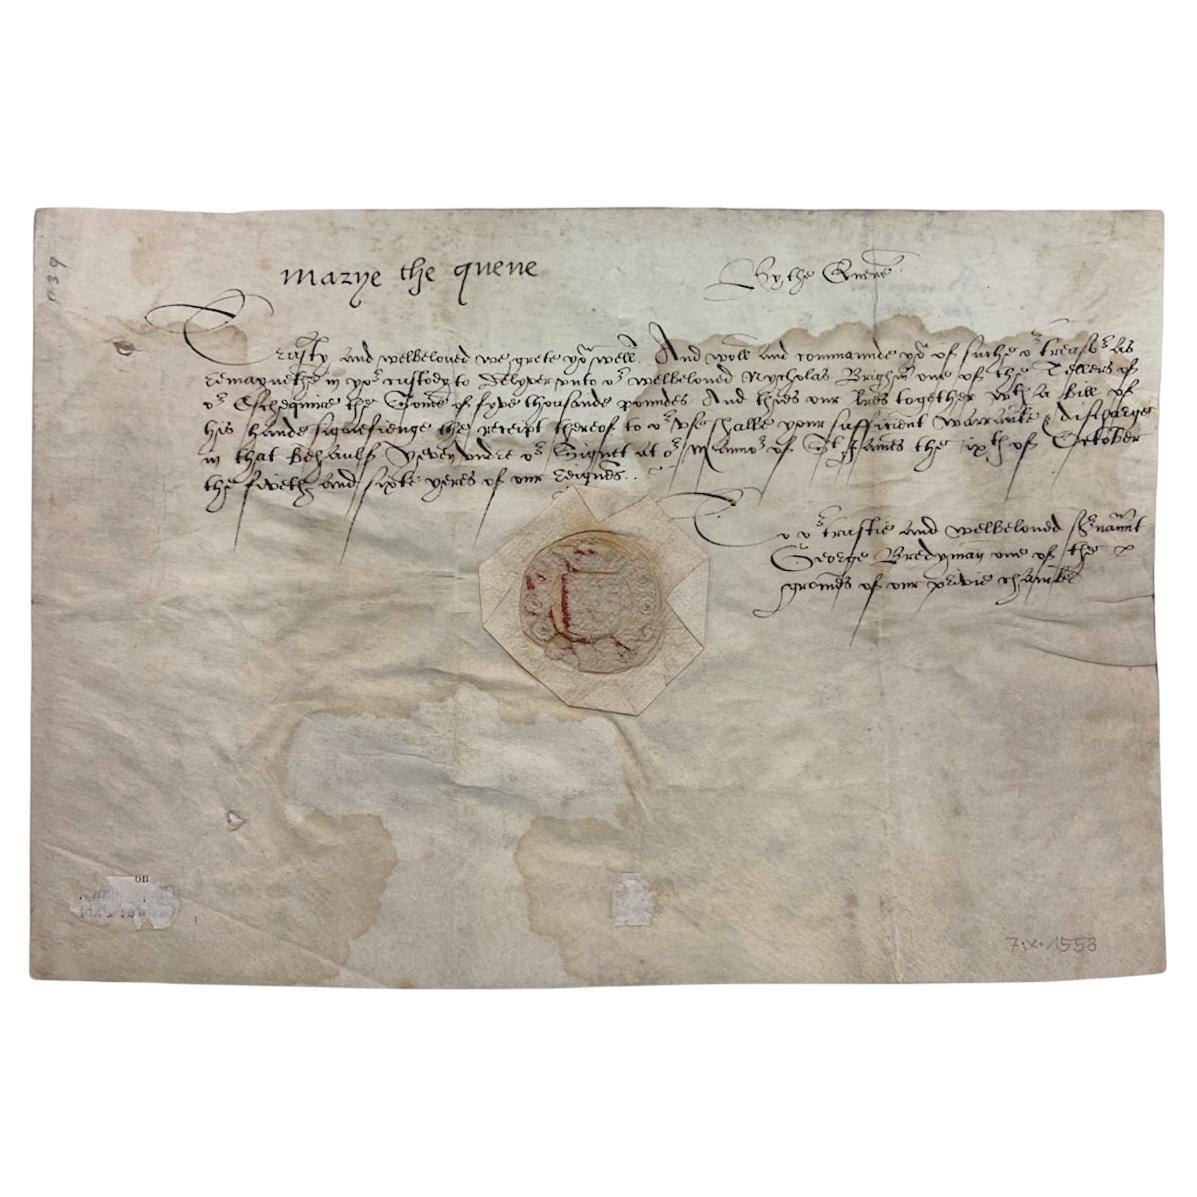 Queen Mary Tudor Signed Royal document with Certificate of Authenticity